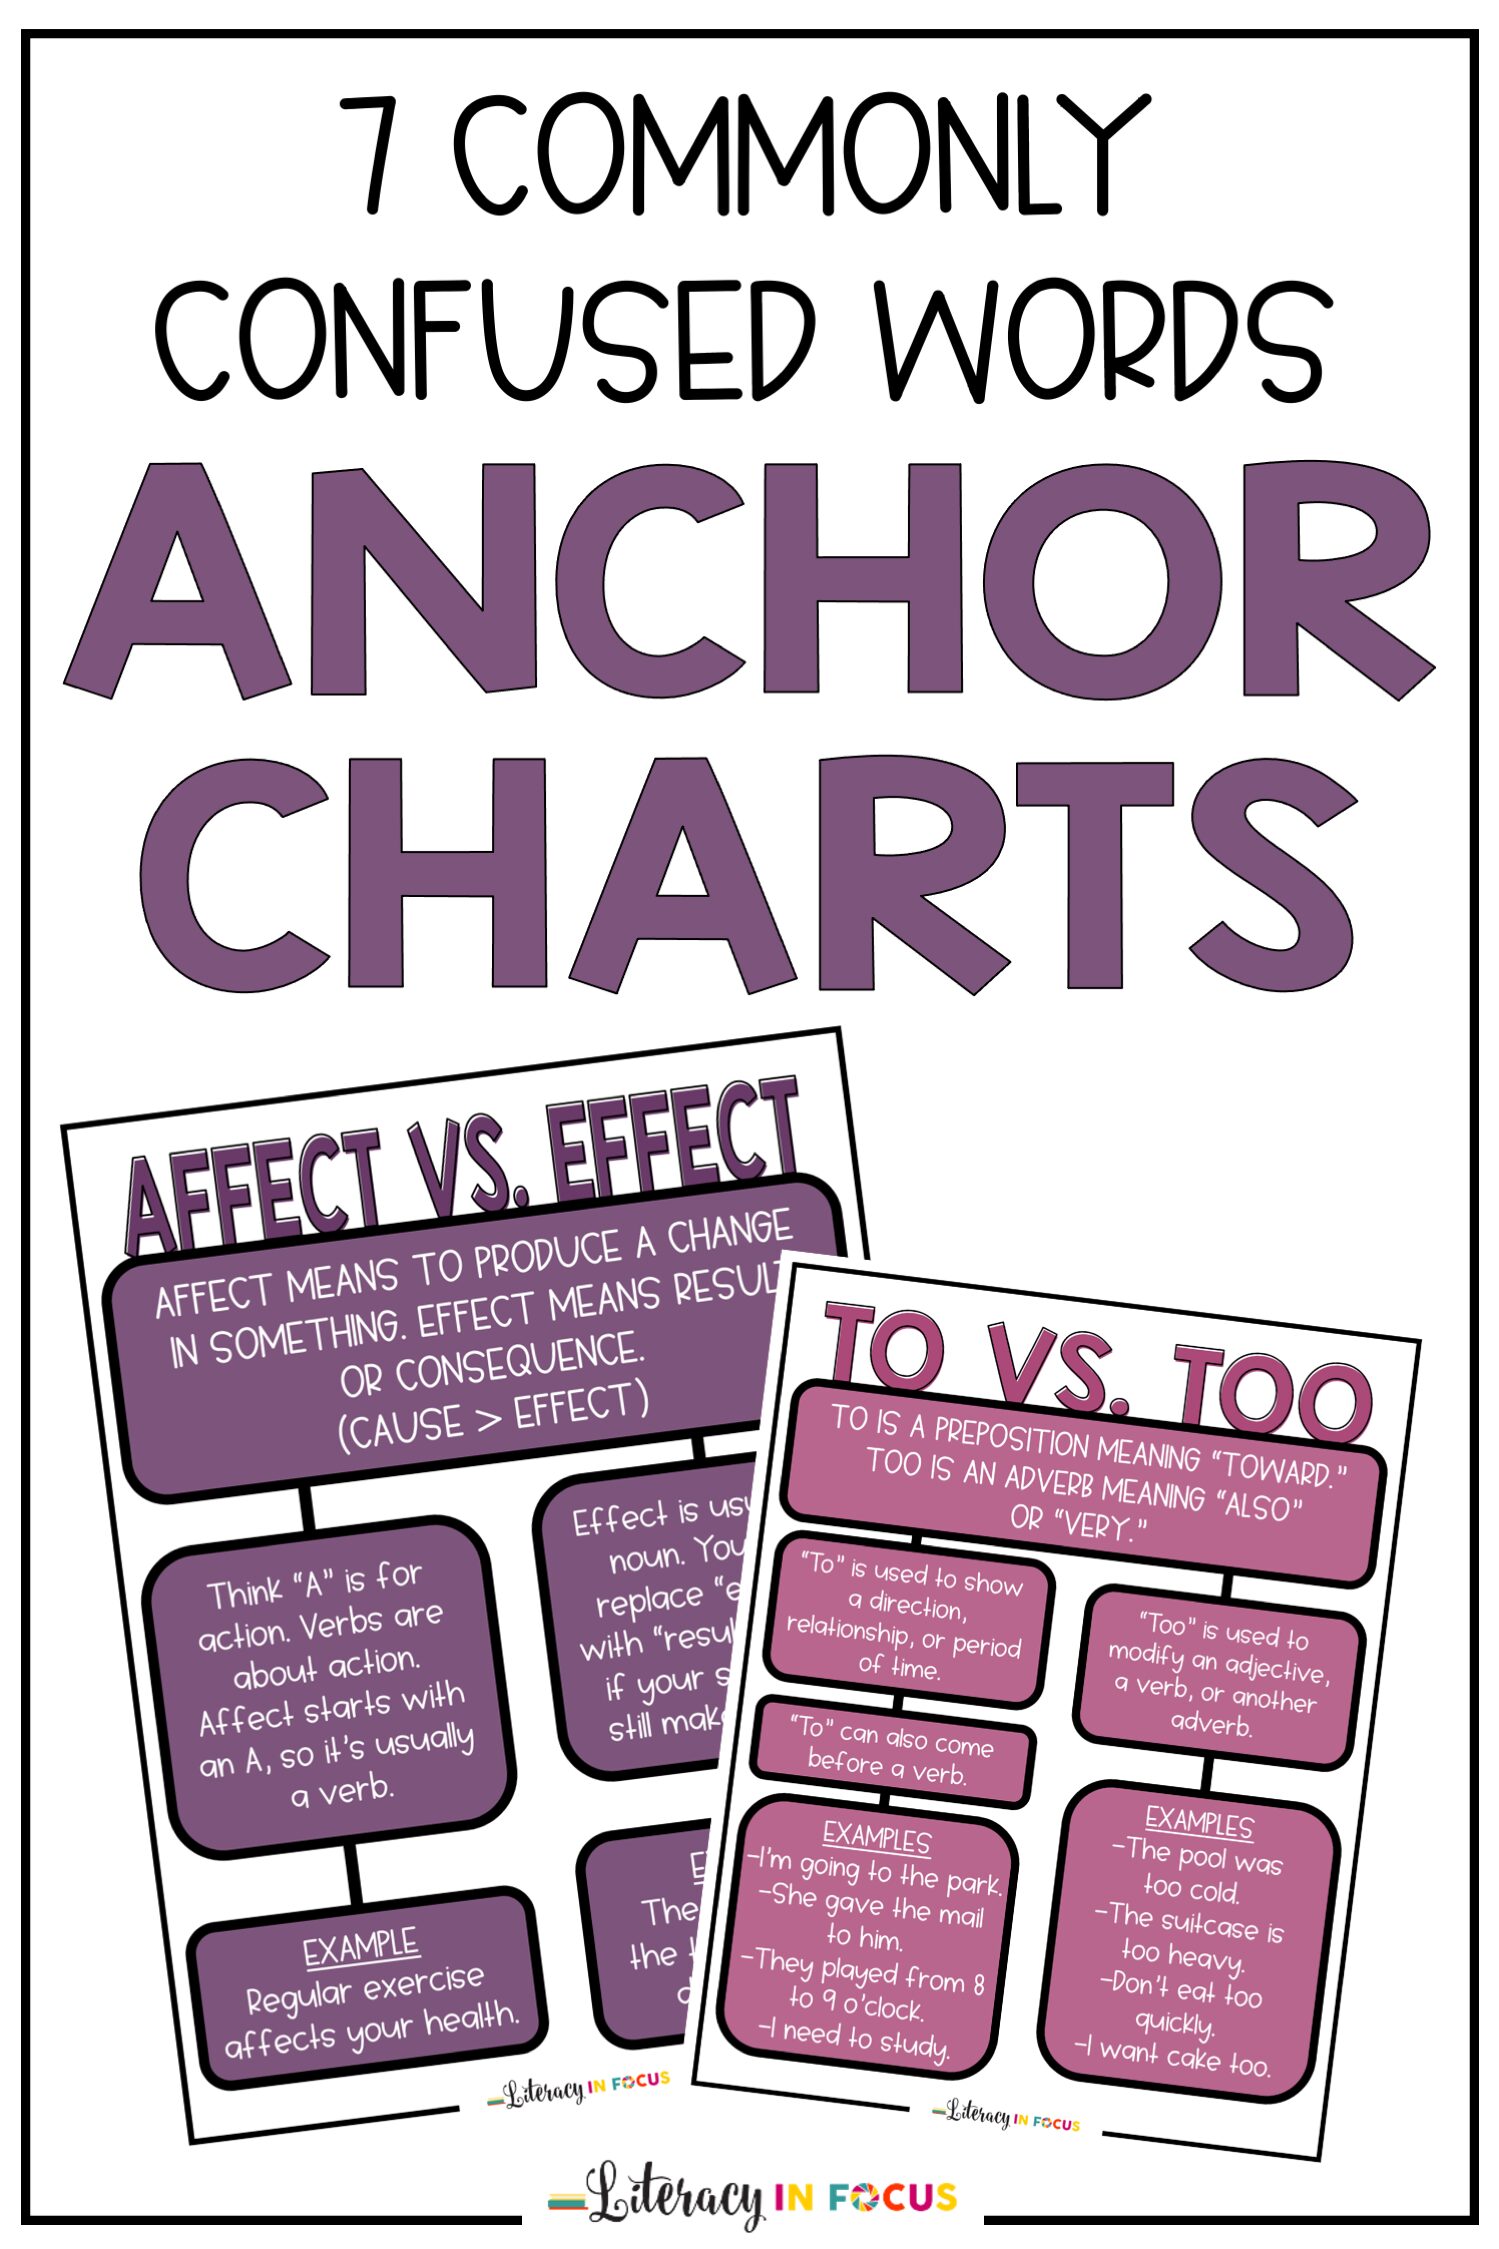 Commonly Confused Words Anchor Charts